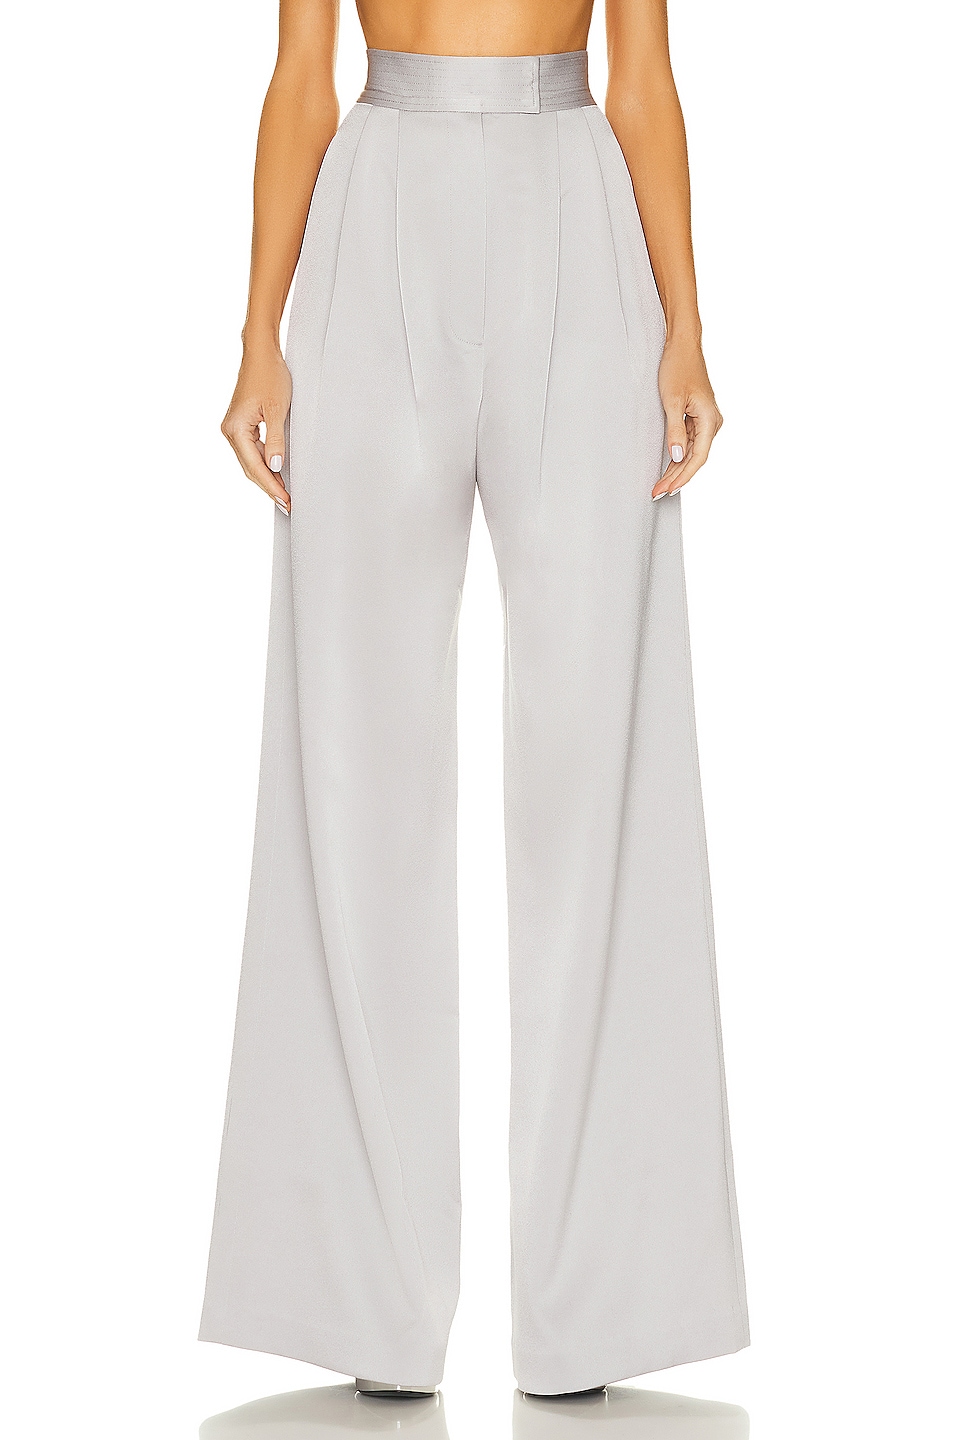 Image 1 of Alex Perry Cadence Pleat Pant in Silver